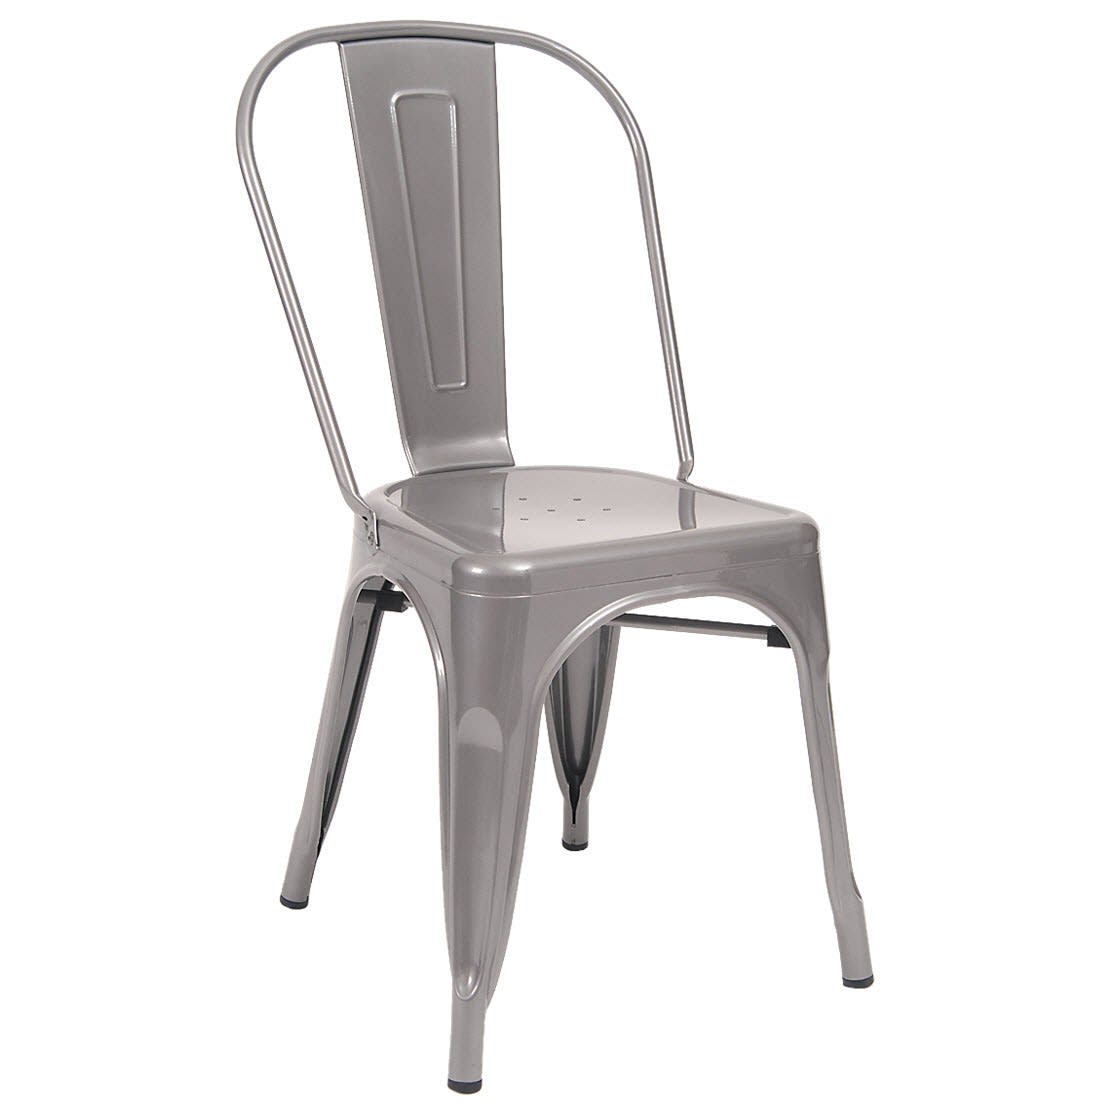 Bistro Style Metal Chair in Light Grey Finish